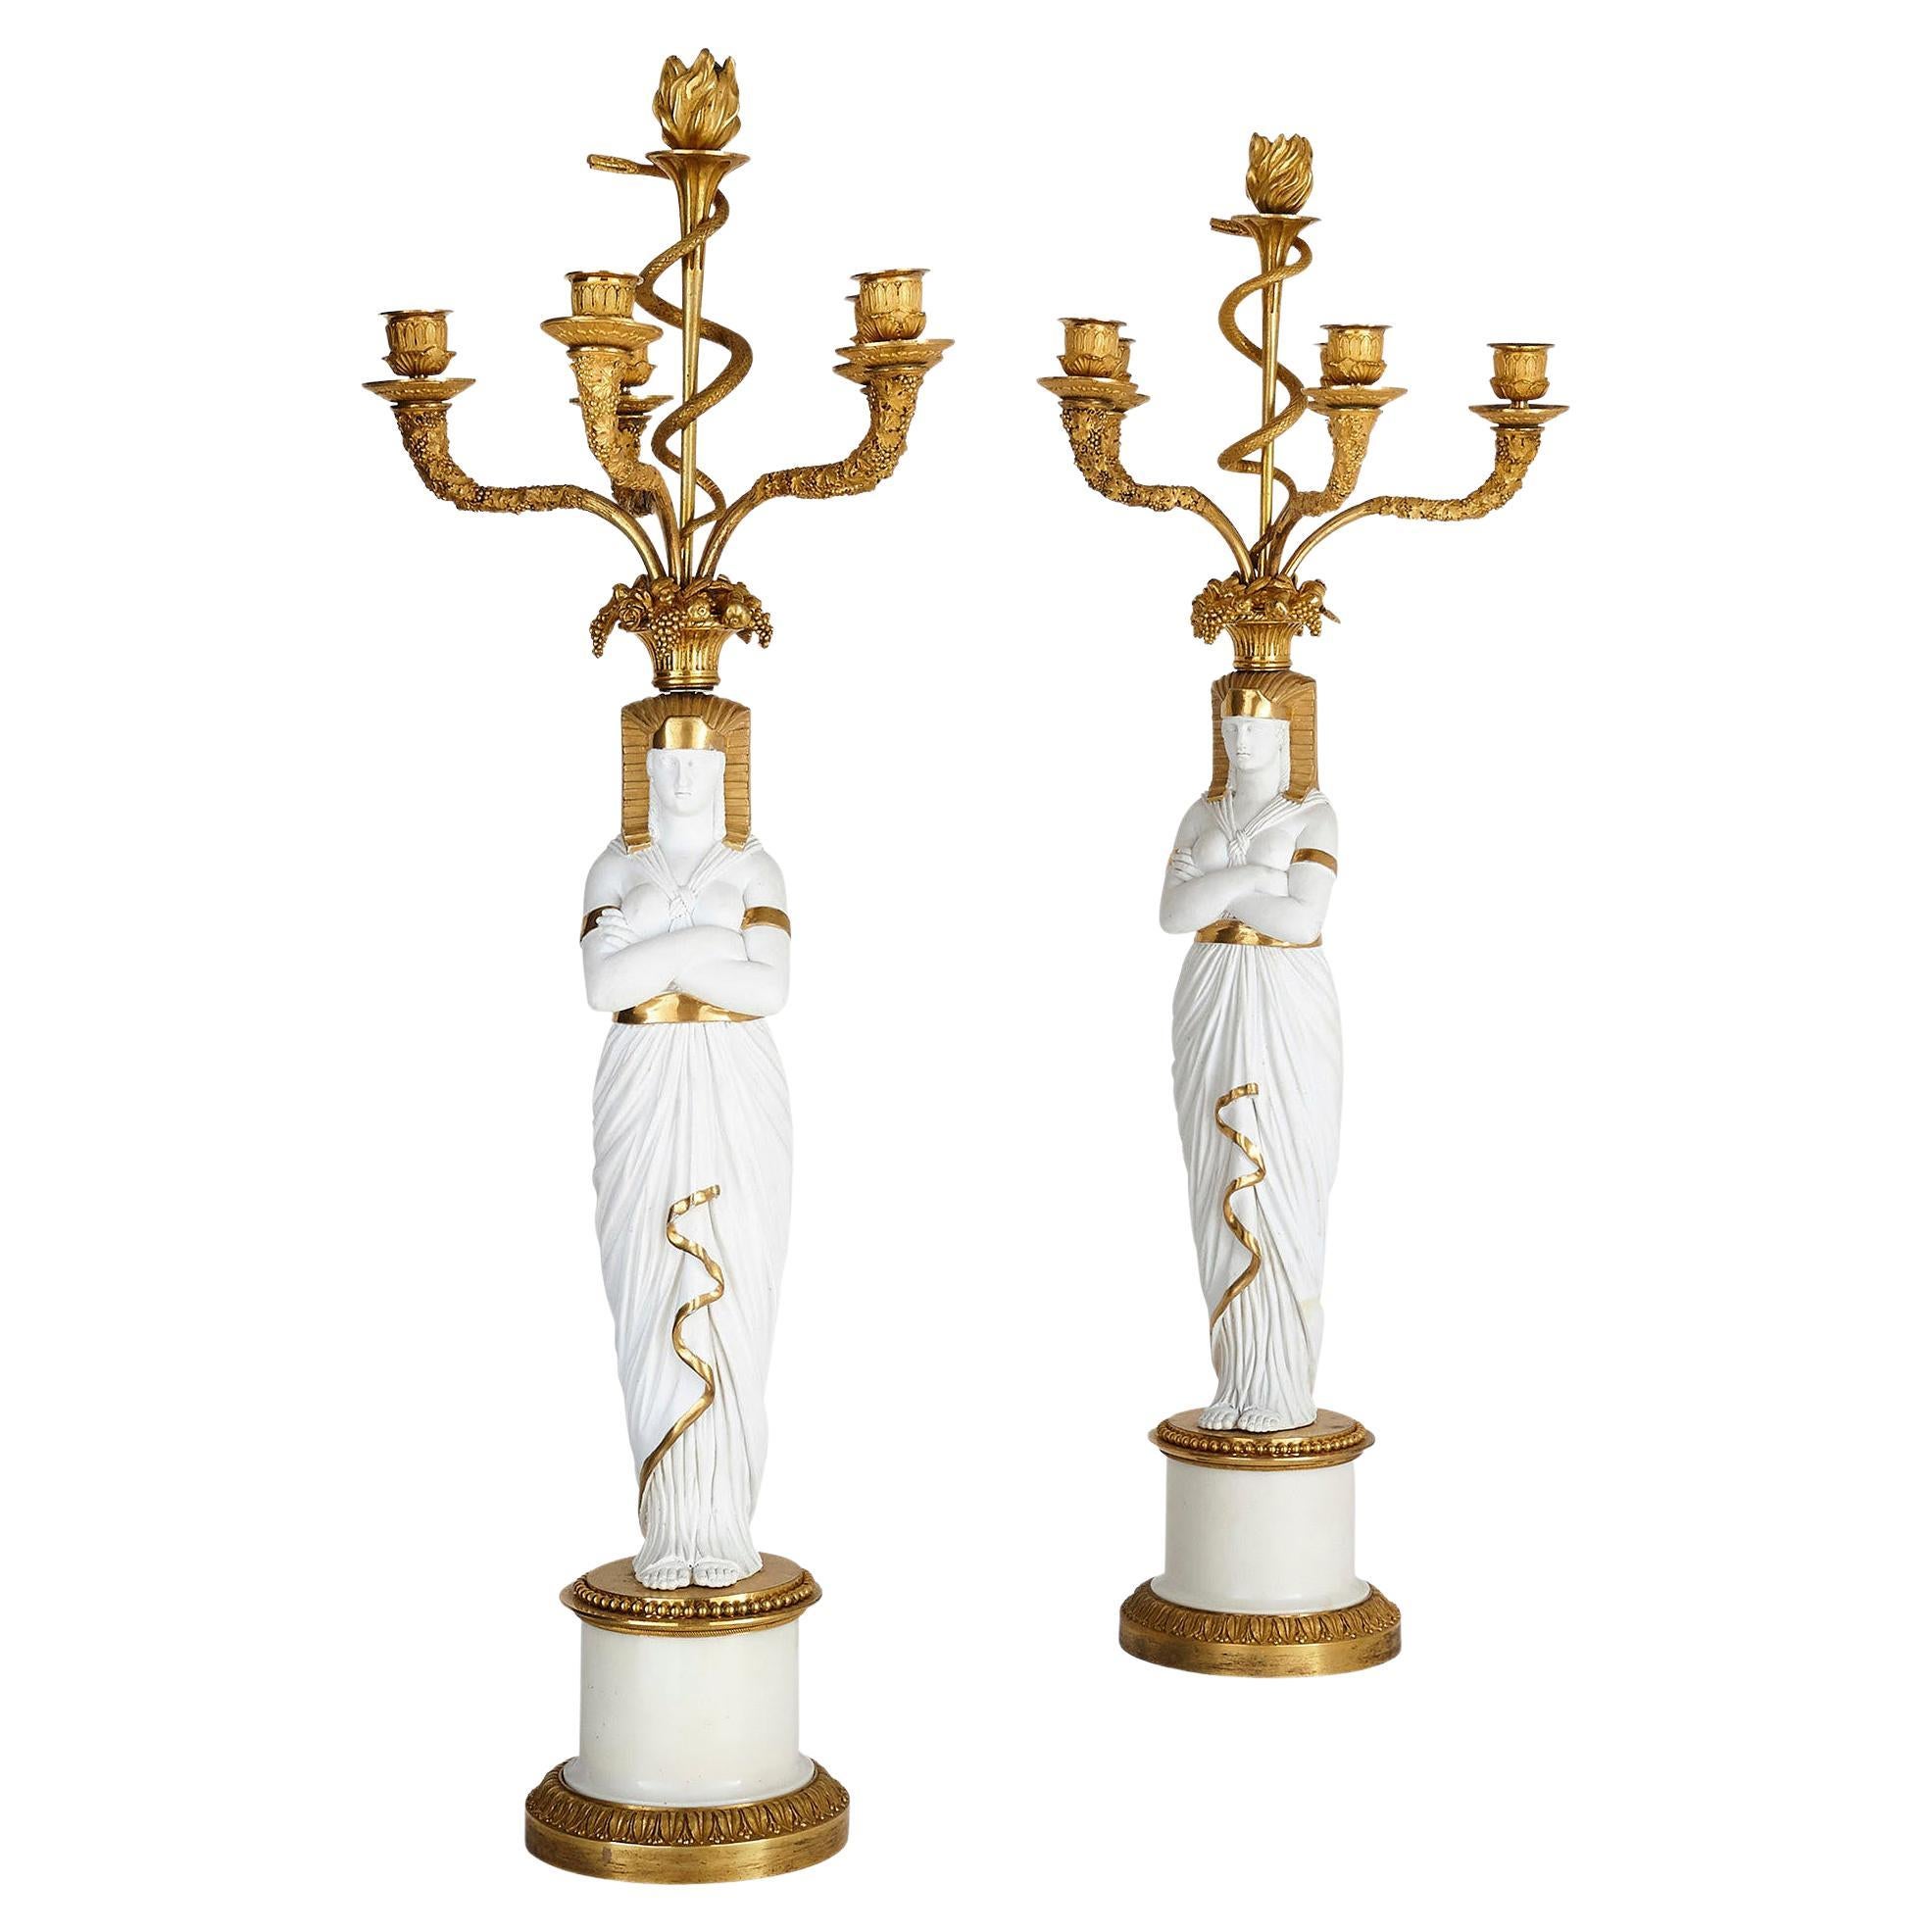 French Empire Period Egyptian Style Porcelain Candelabra For Sale